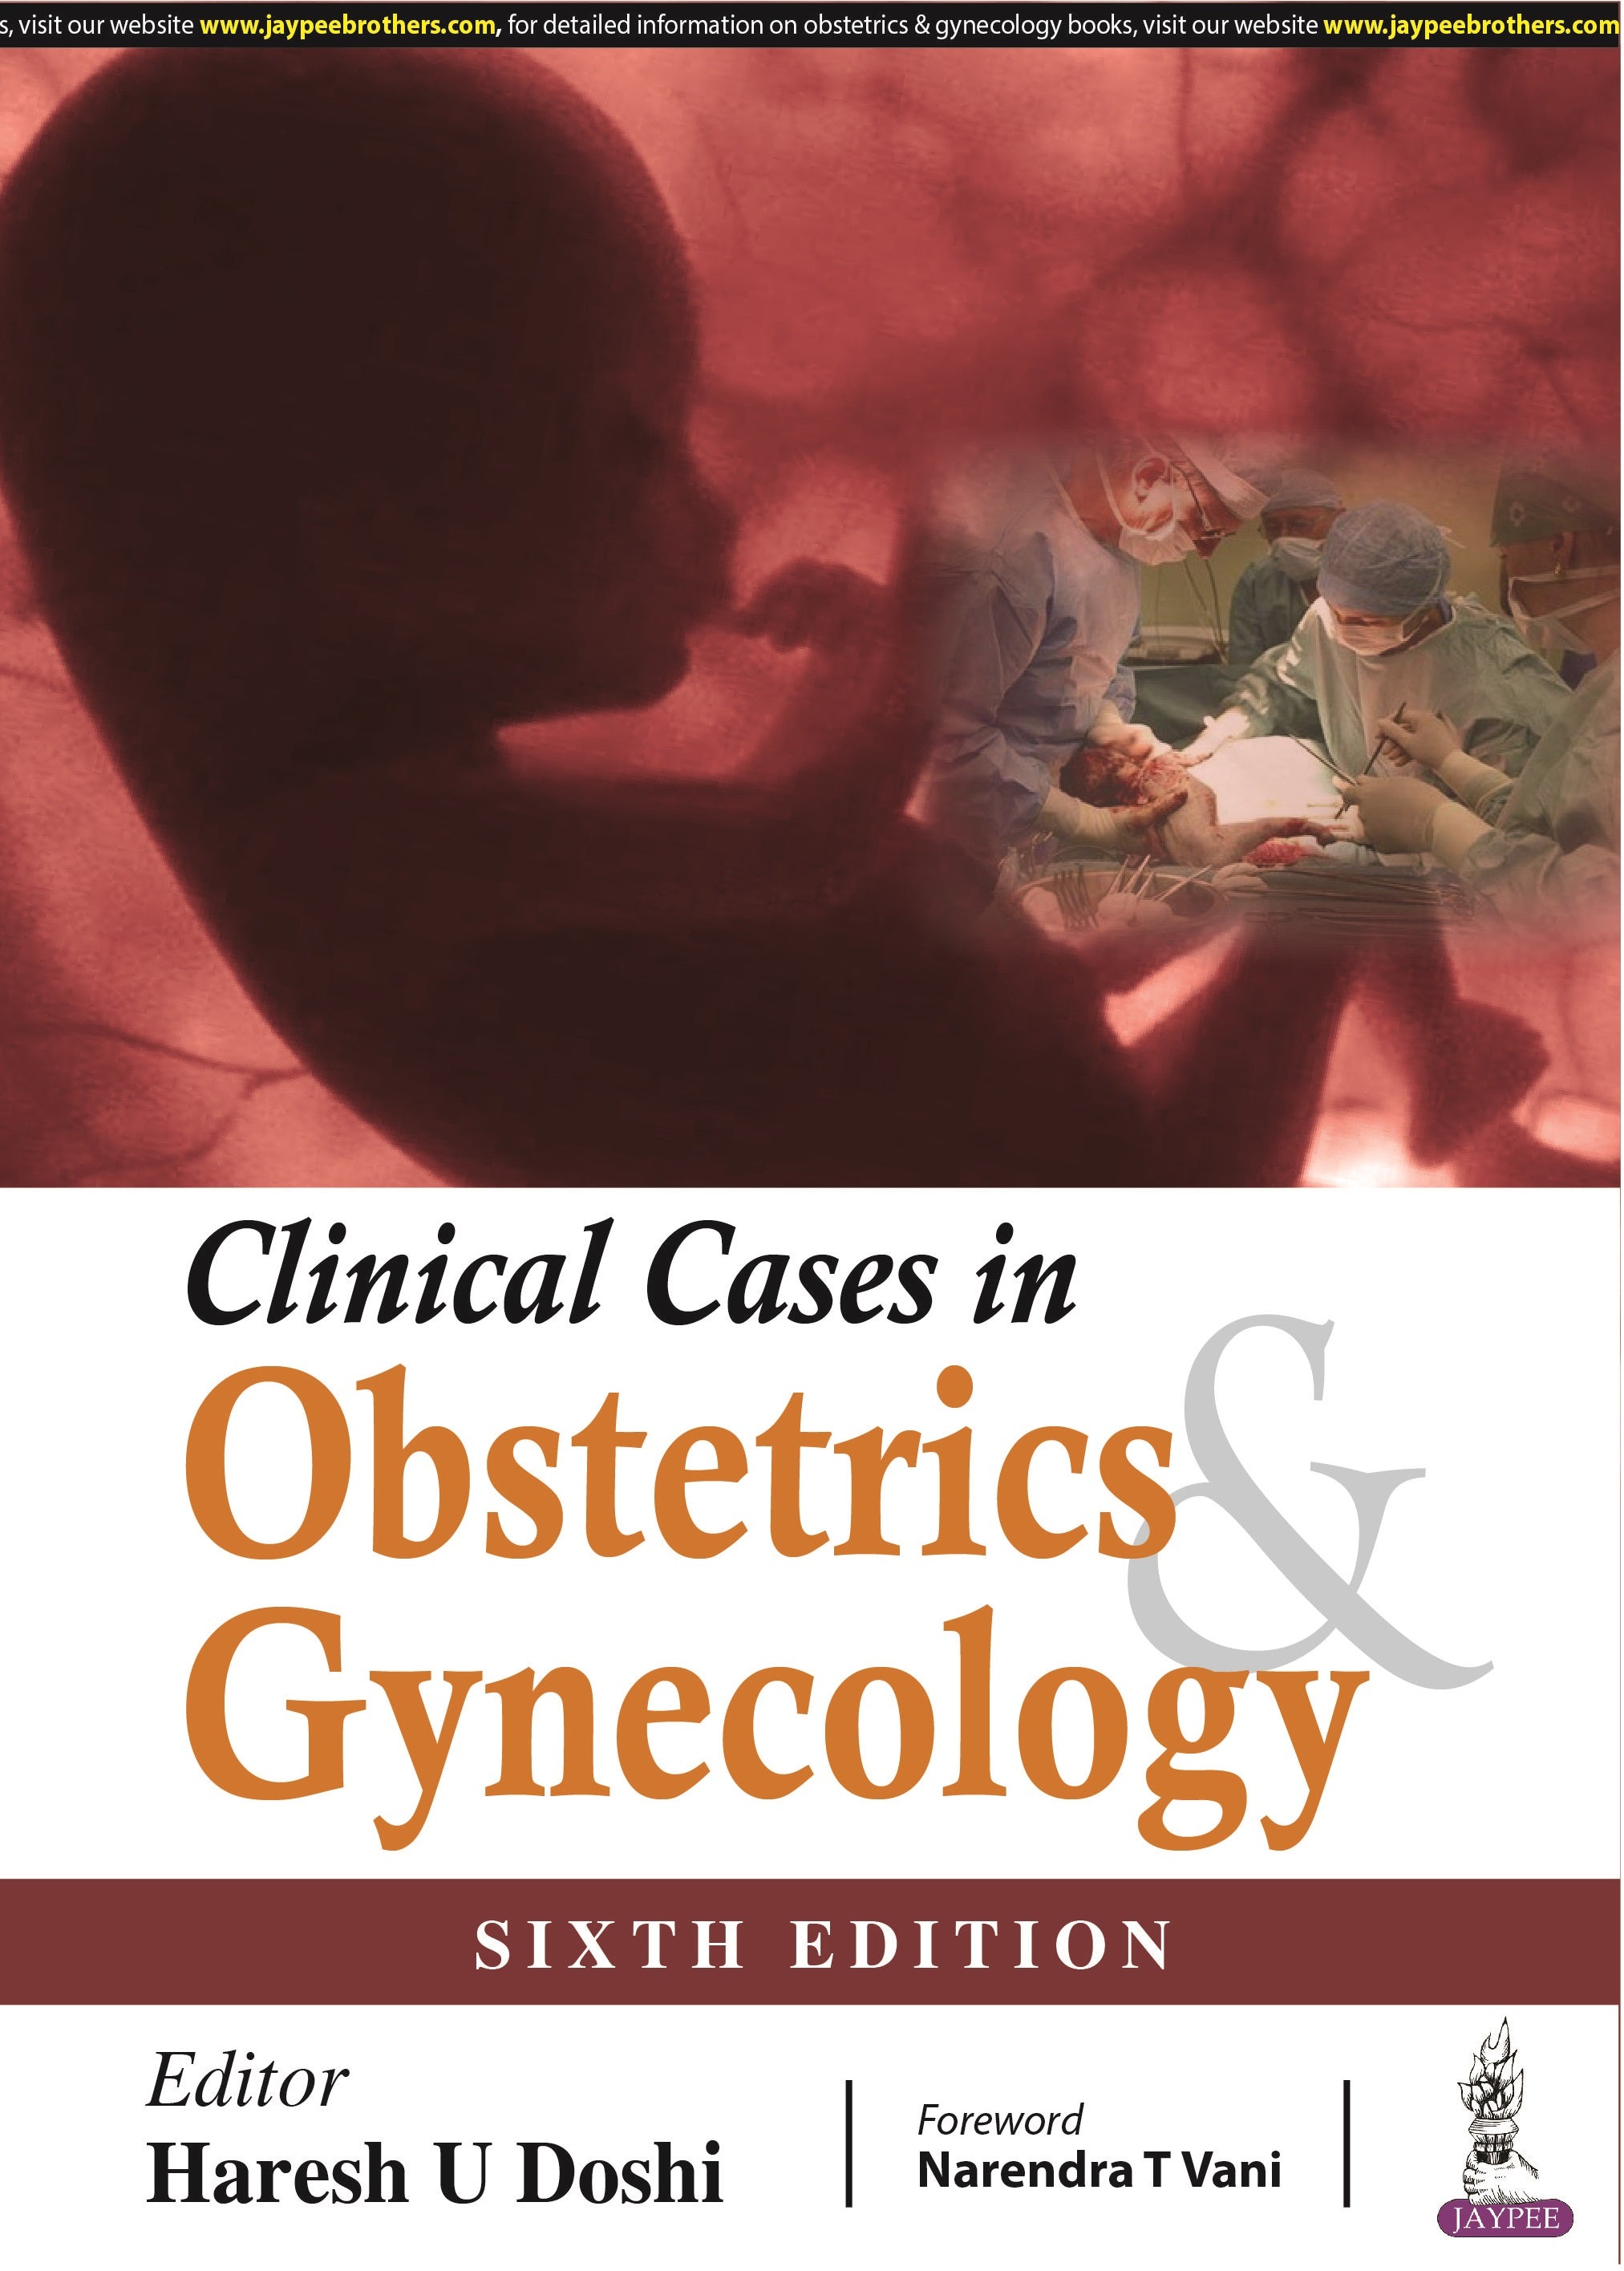 CLINICAL CASES IN OBSTETRICS & GYNECOLOGY,6/E,HARESH U DOSHI